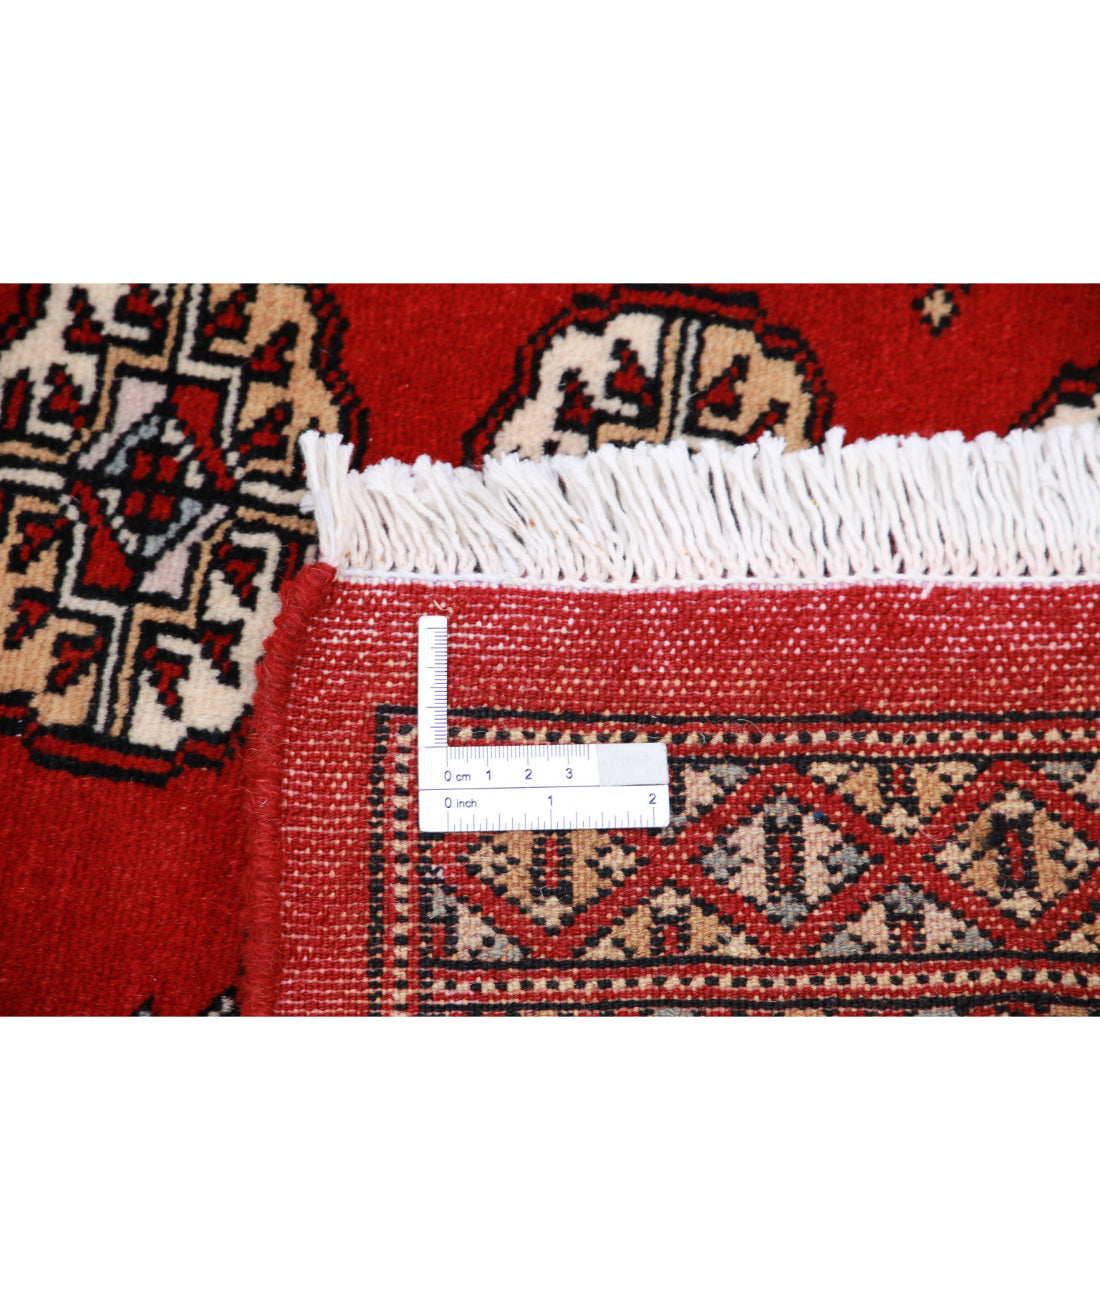 Hand Knotted Tribal Bokhara Wool Rug - 6'0'' x 8'10'' 6'0'' x 8'10'' (180 X 265) / Red / Black